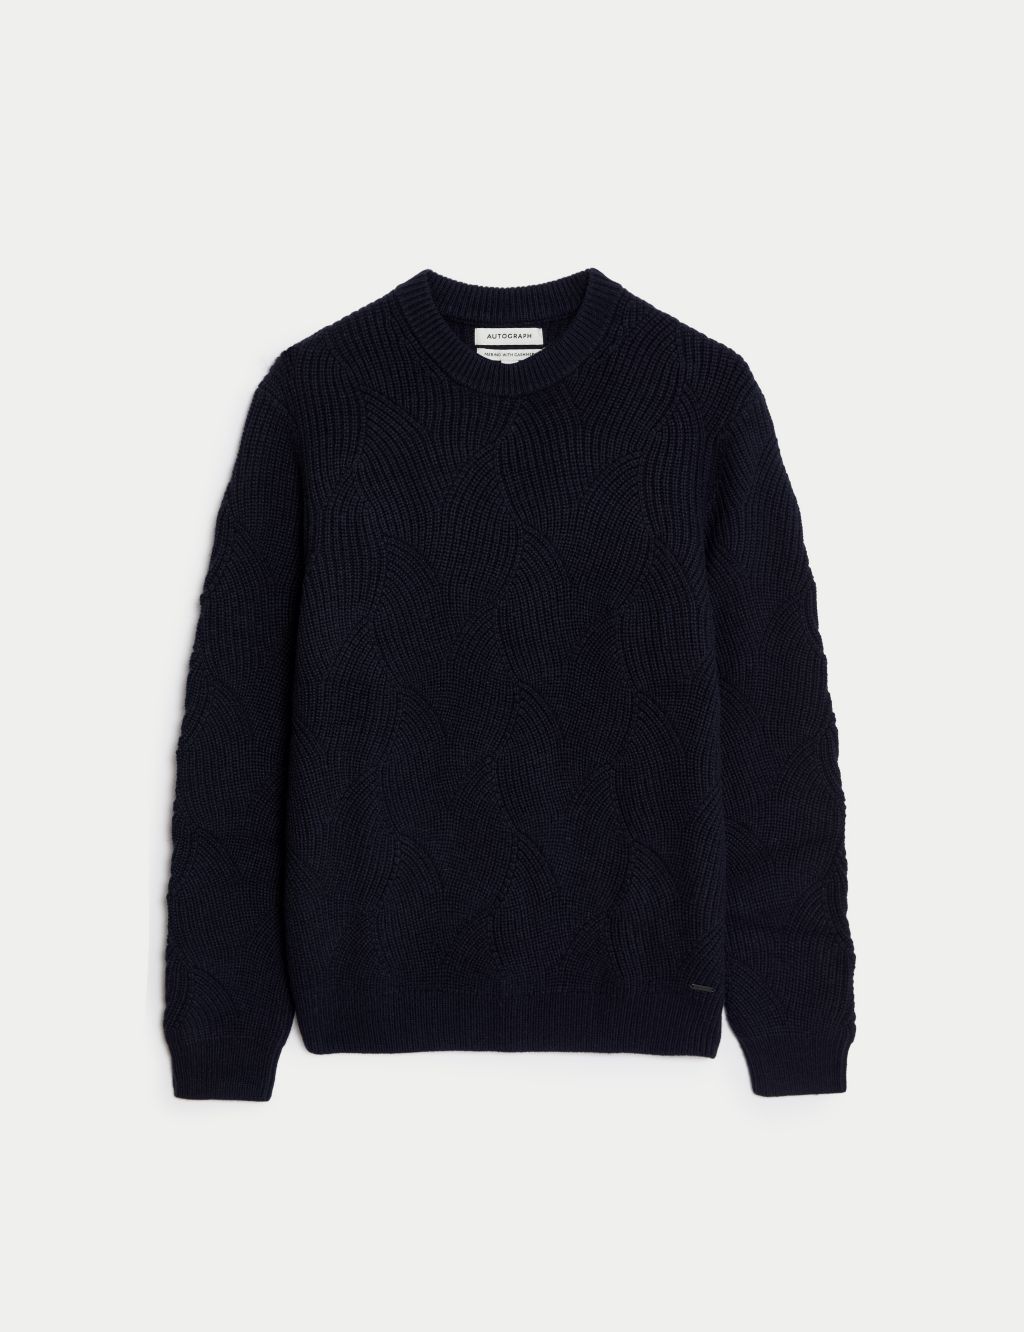 Extra Fine Merino Wool Jumper with Cashmere image 2